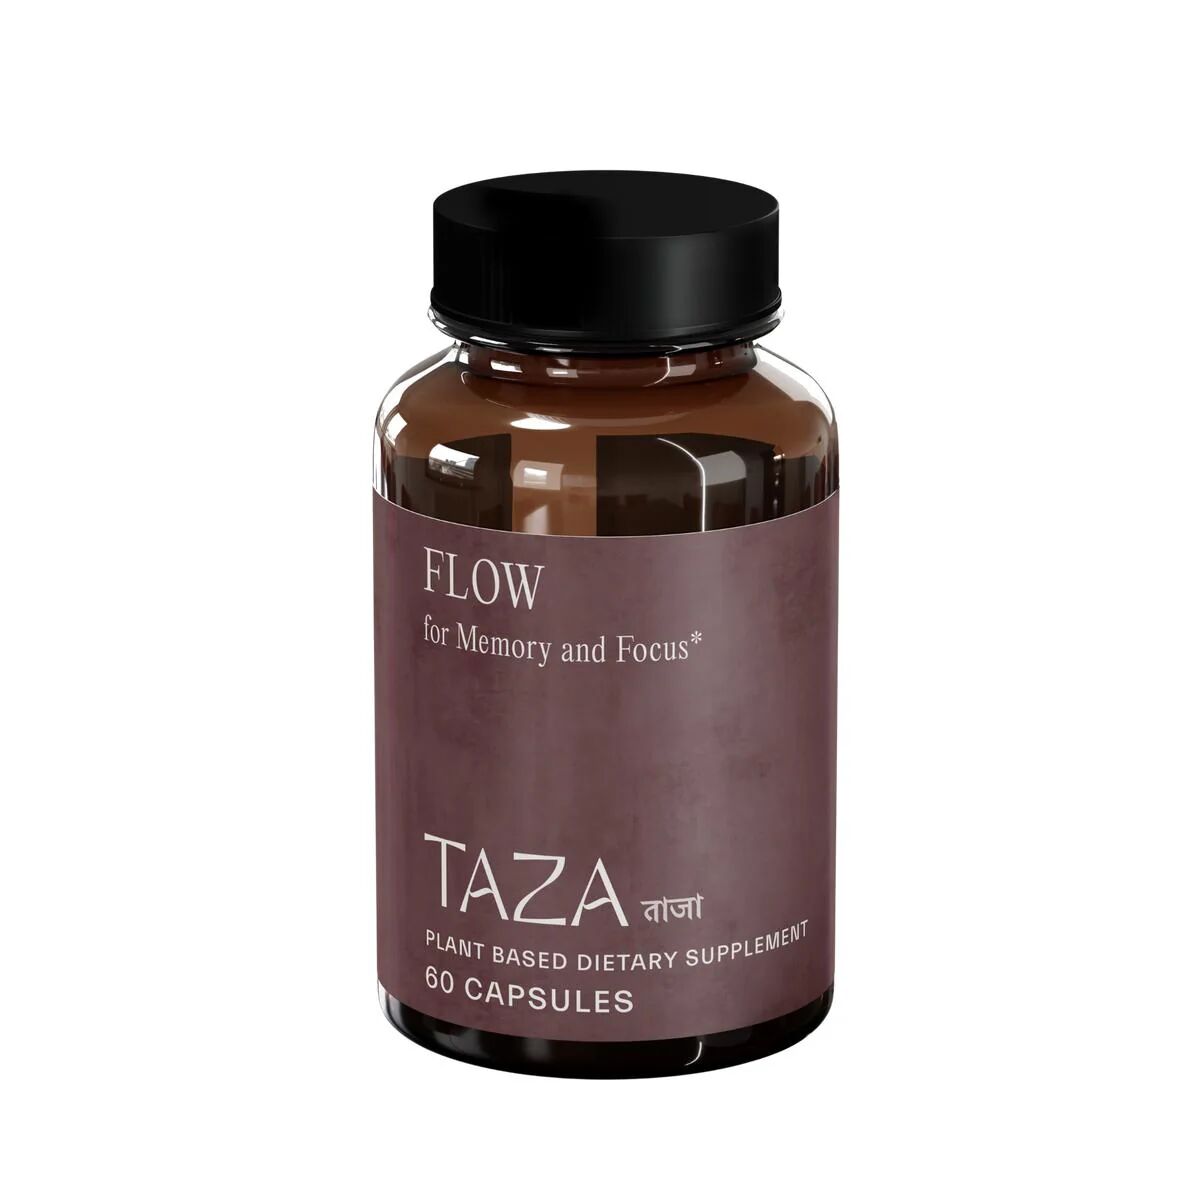 Taza Ayurveda Flow for Memory and Focus